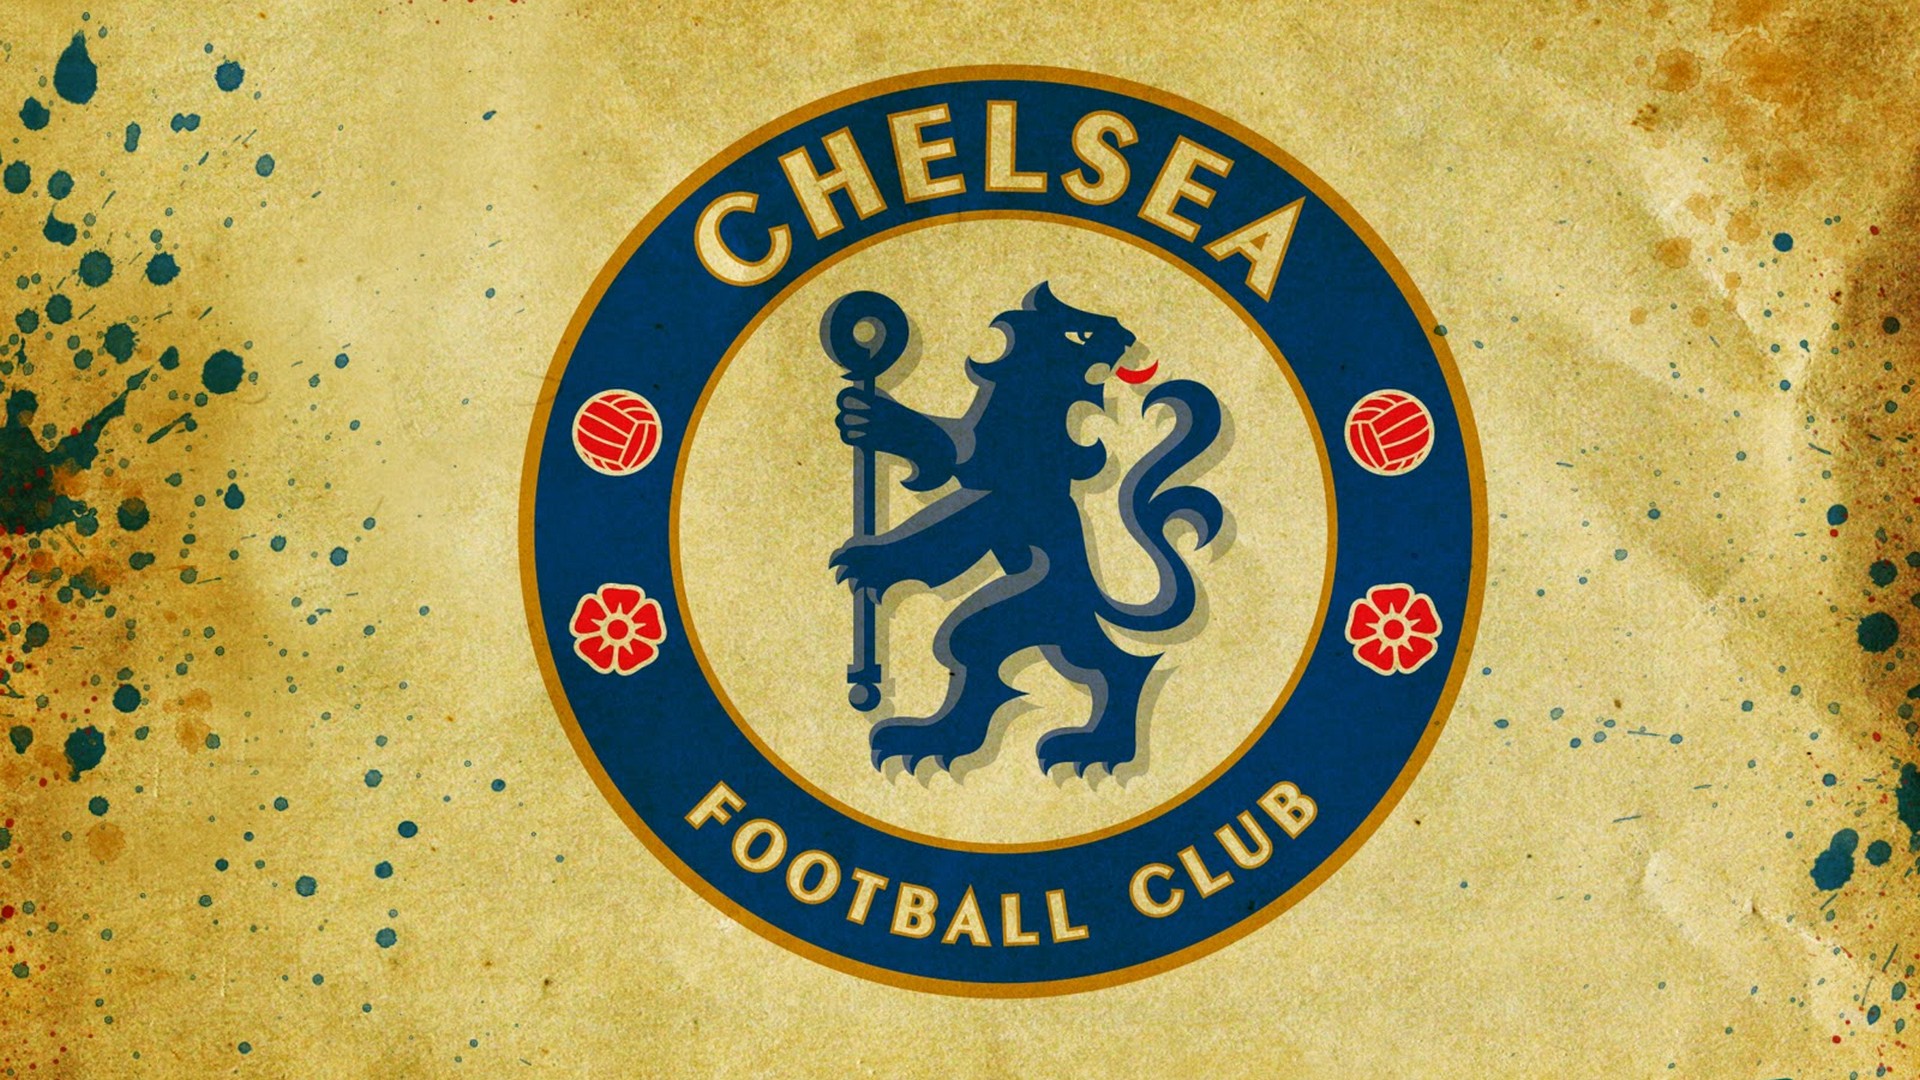 Chelsea Soccer Wallpaper HD With Resolution 1920X1080 pixel. You can make this wallpaper for your Mac or Windows Desktop Background, iPhone, Android or Tablet and another Smartphone device for free